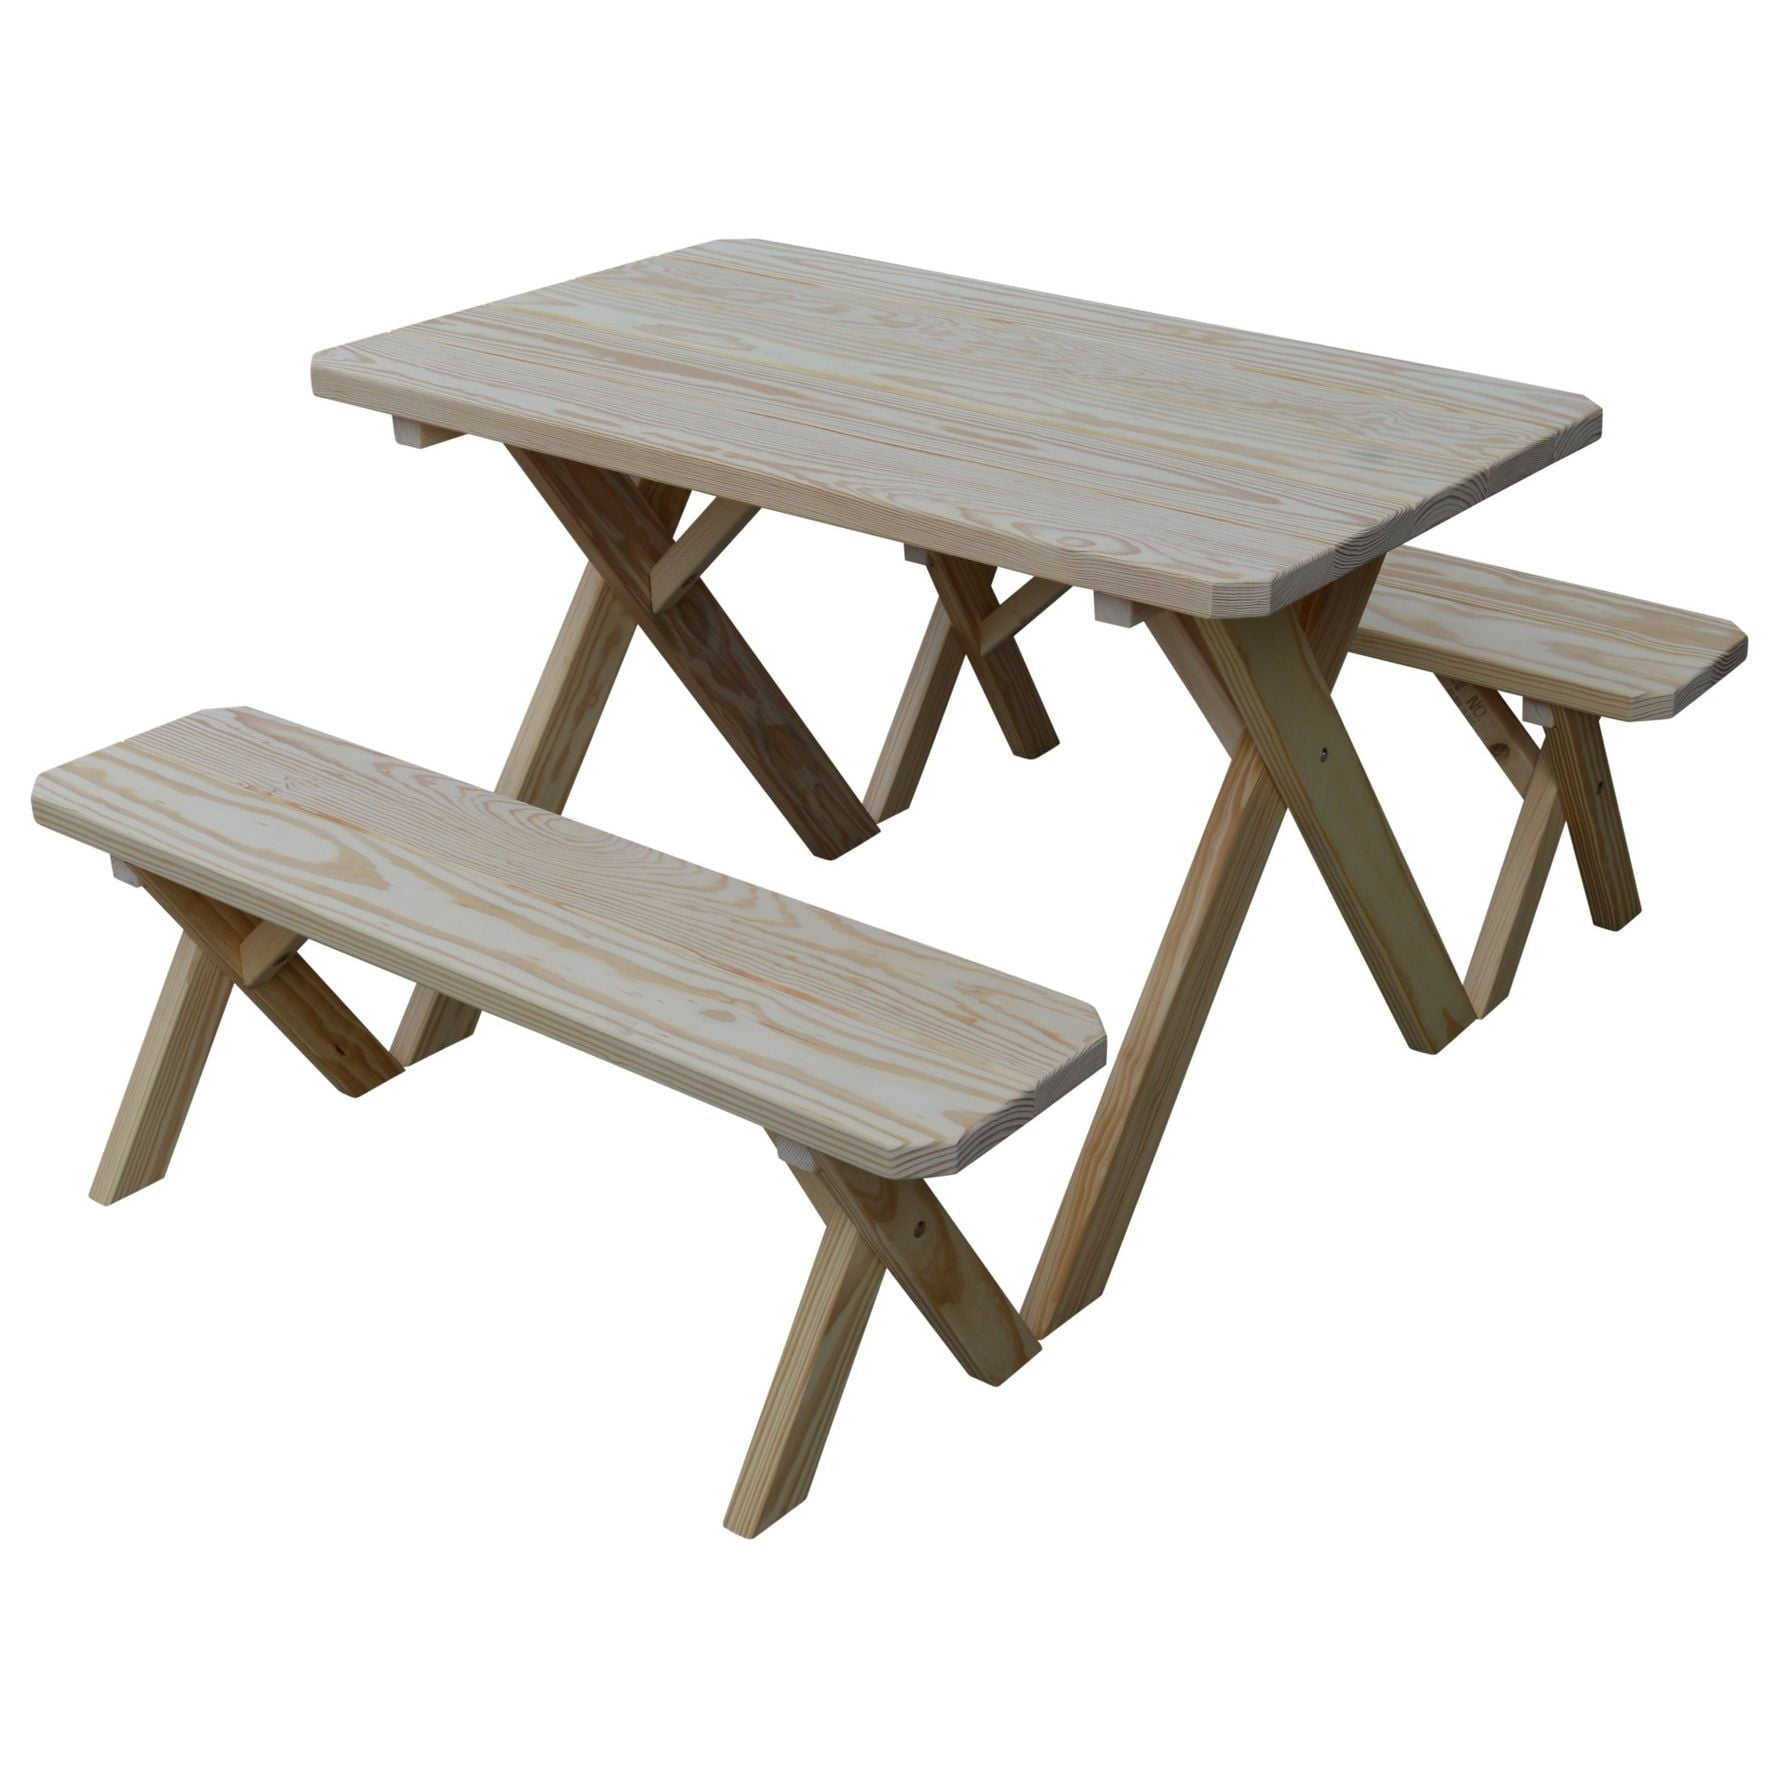 Pine Cross Leg Picnic Table with Benches